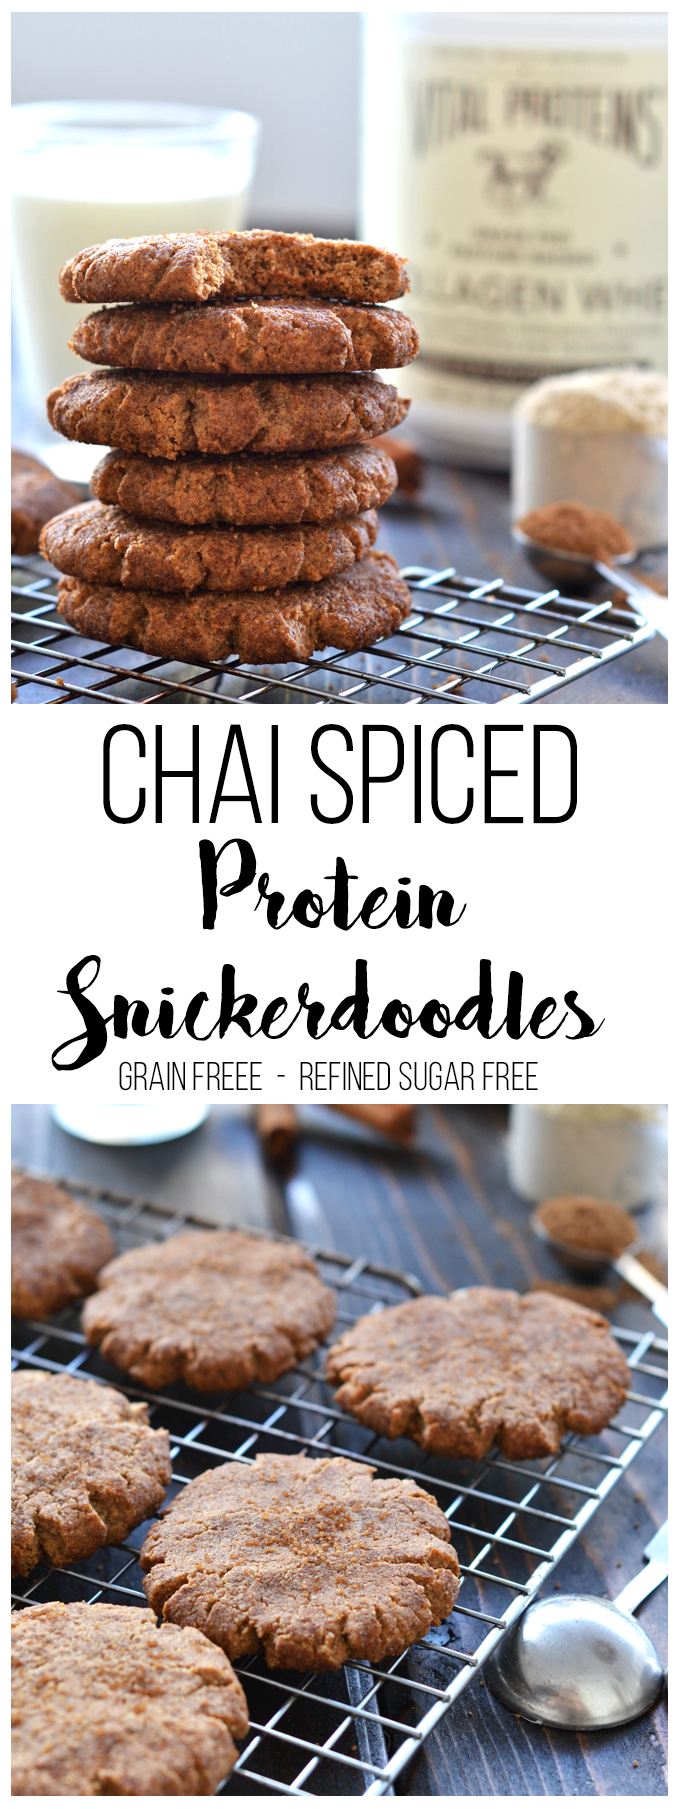 These Chai Spiced Protein Snickerdoodles are packed with protein and a perfect winter treat! They are grain free, refined sugar free and are a healthy option!